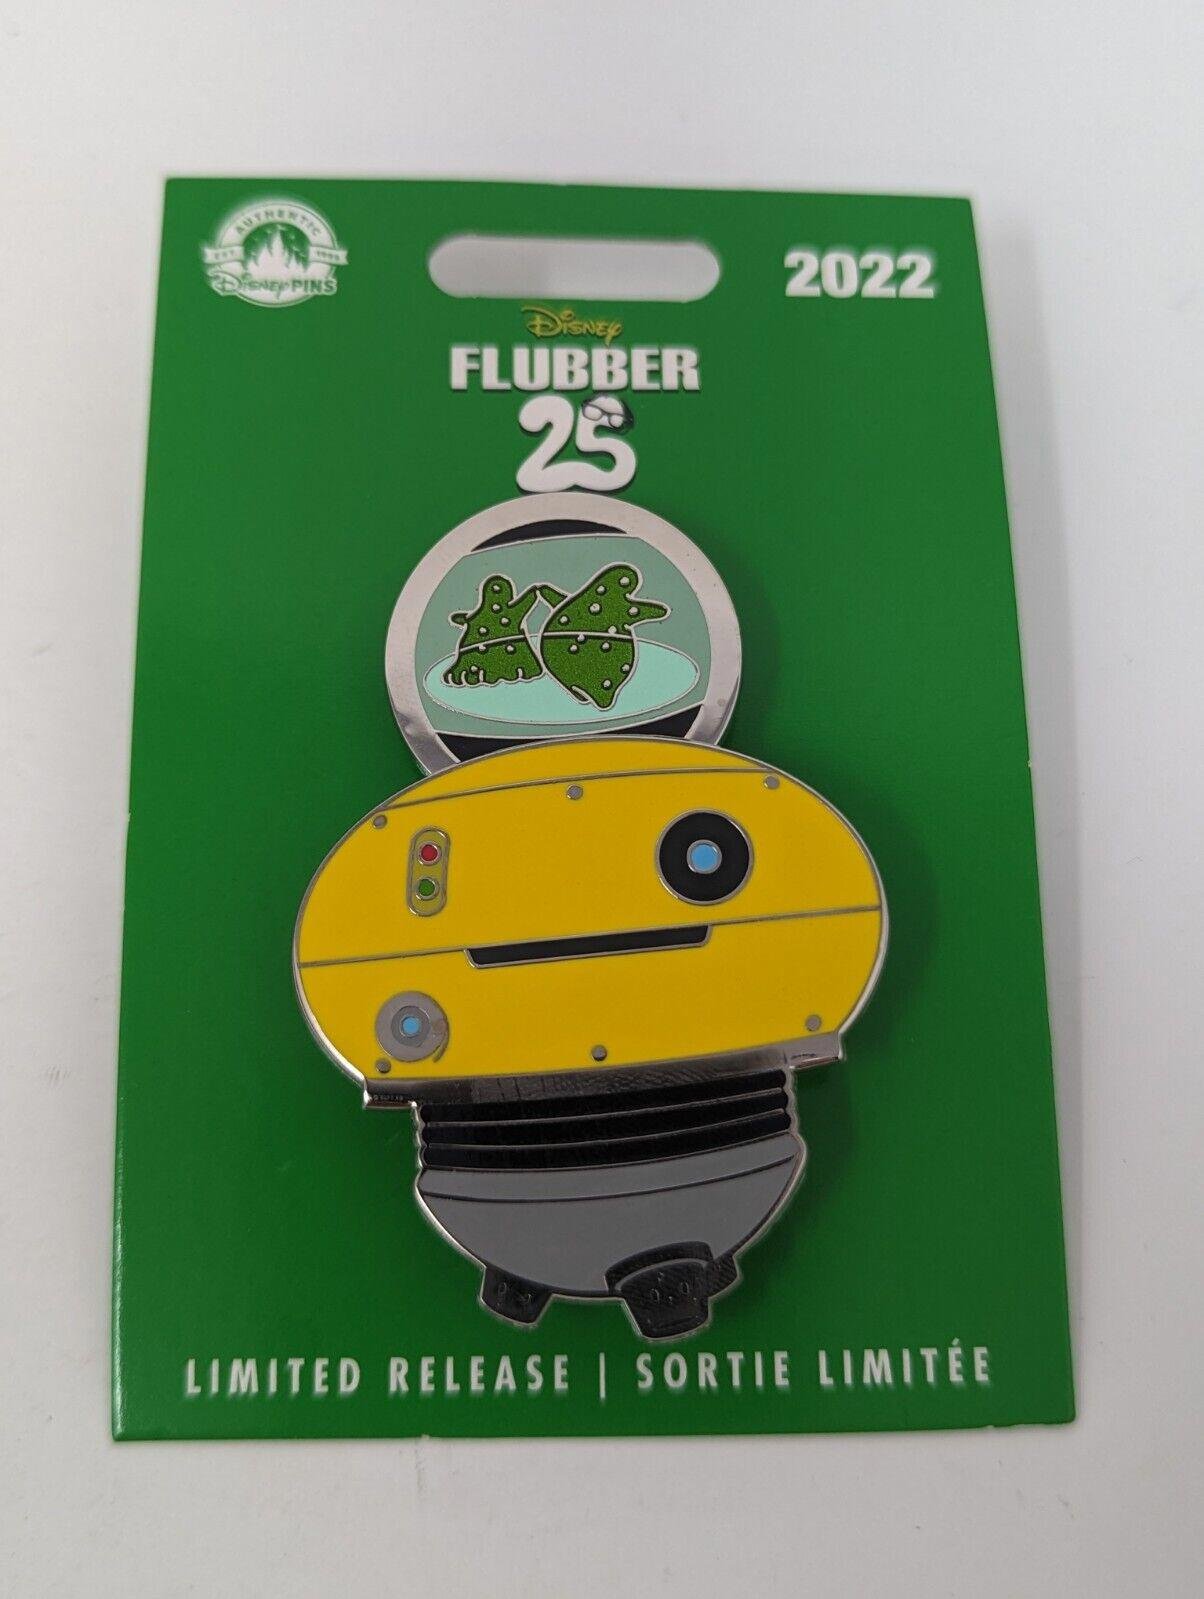 Flubber Weebo 25th Anniversary Disney LR Pin 4Oa9oPd0c